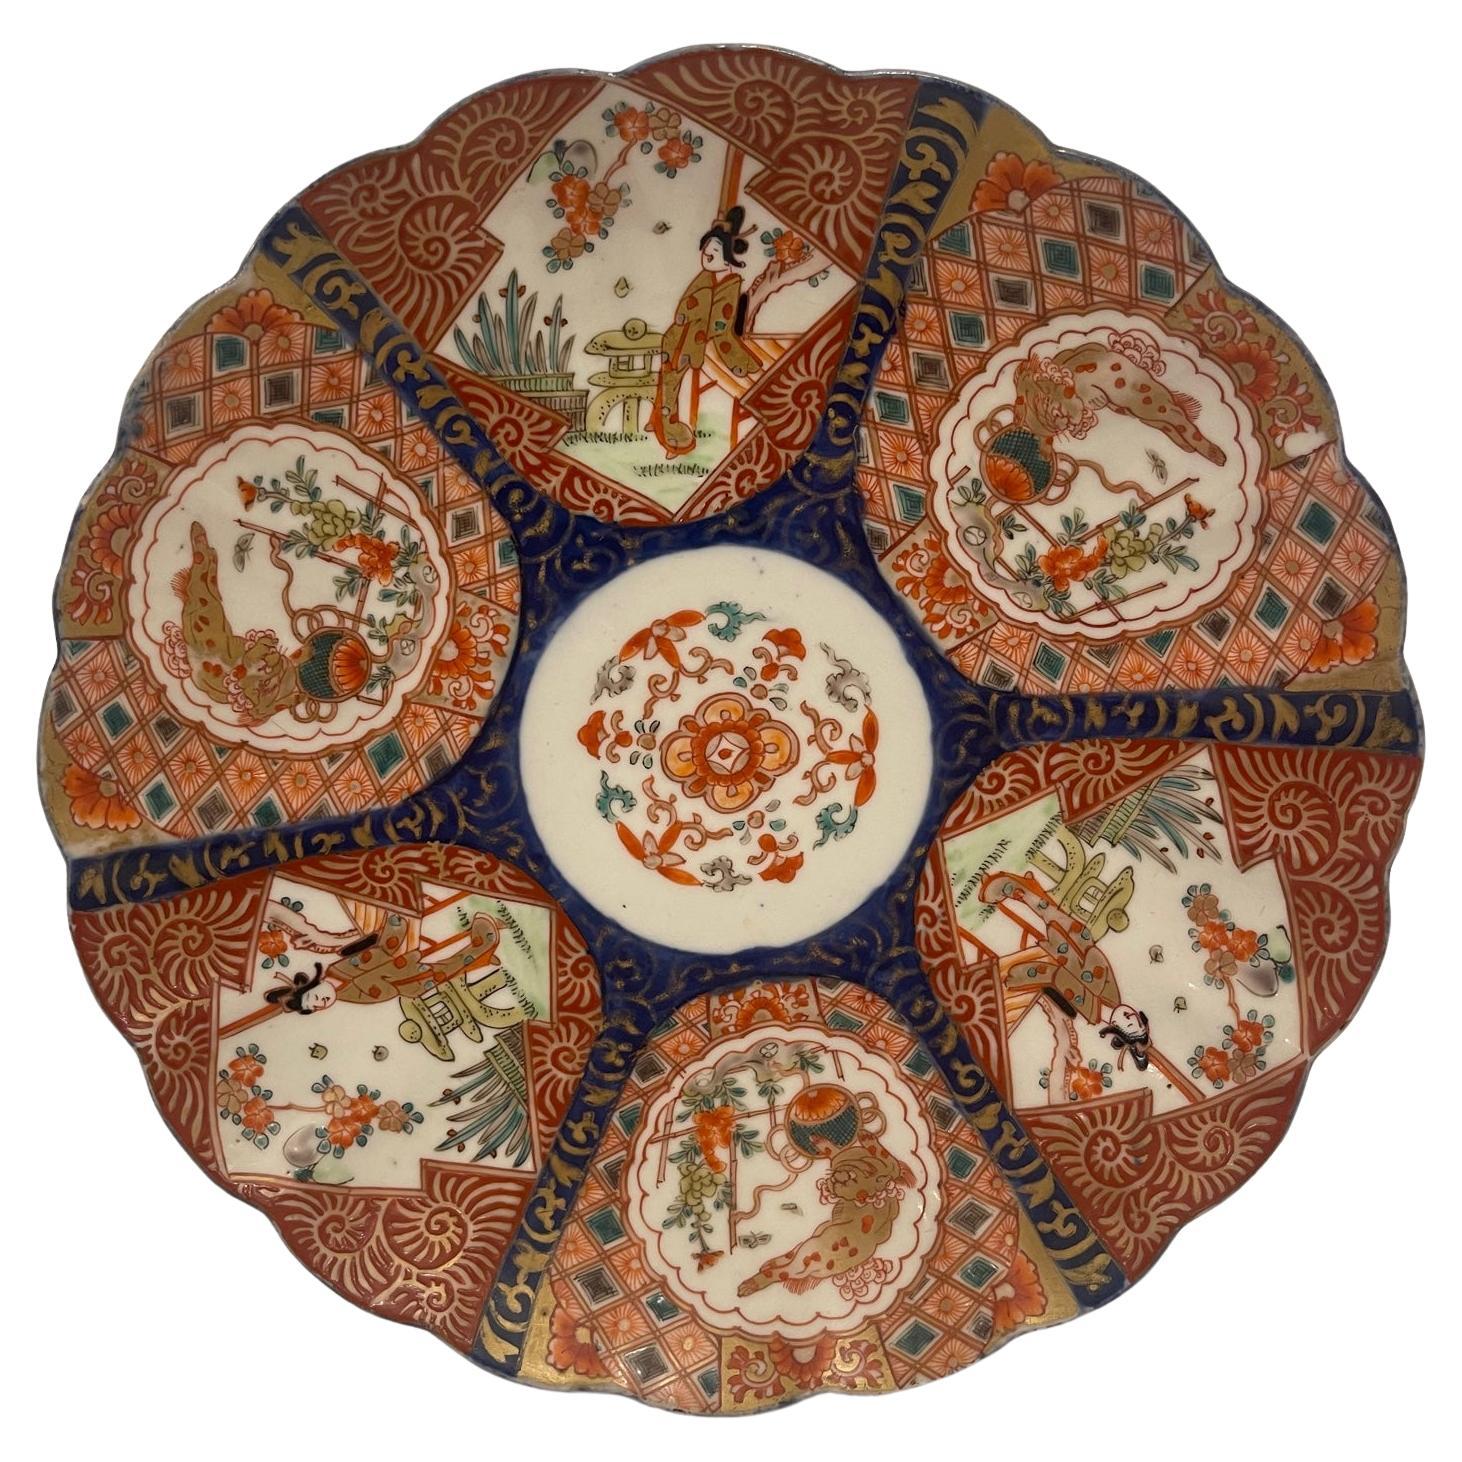 Imari Scalloped Charger Porcelain Plate, 19th Century